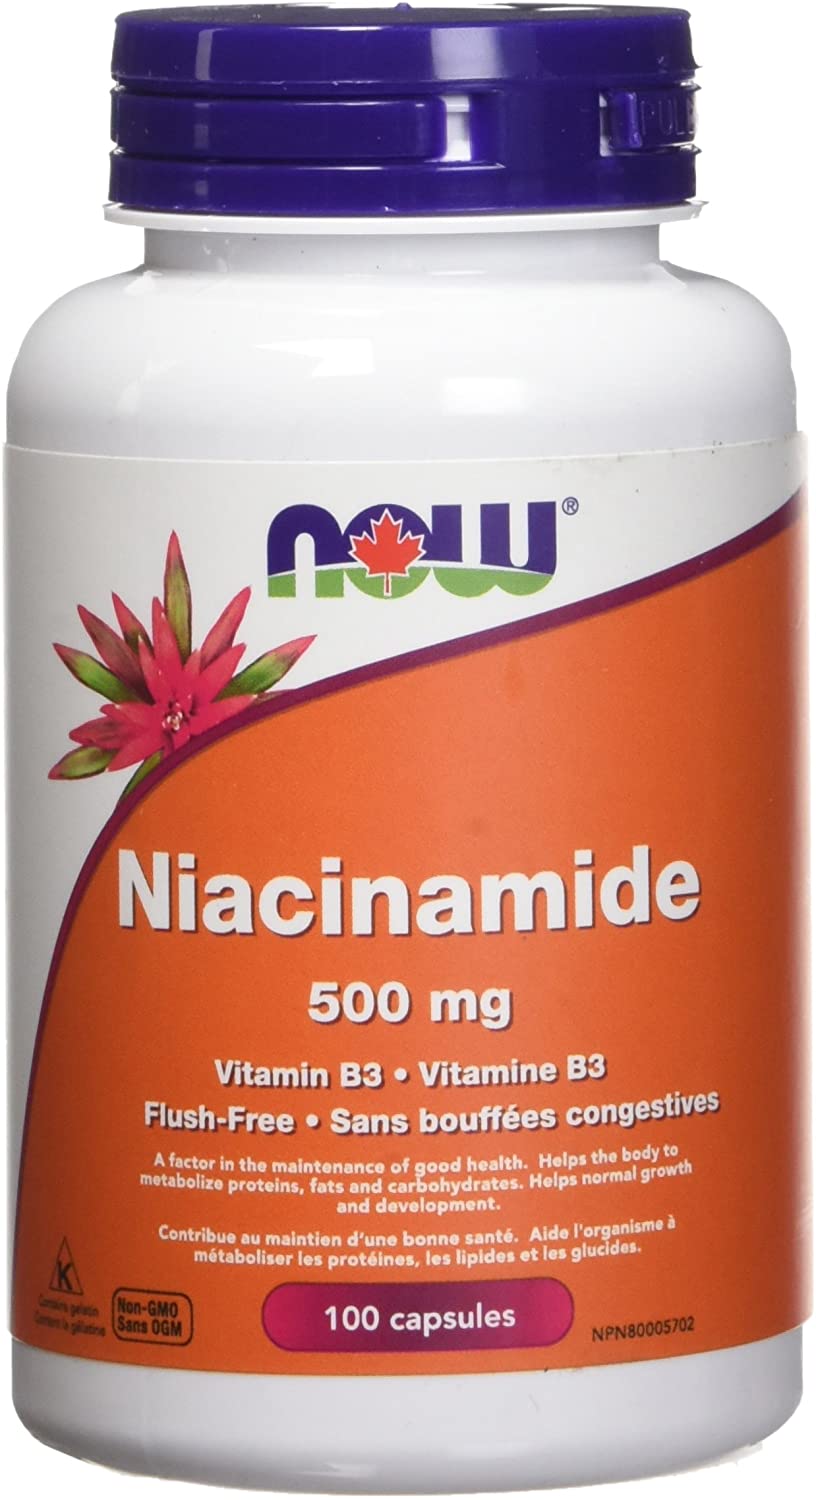 NOW80478_Cats_NOW Niacinamide 500 mg_100 capsules